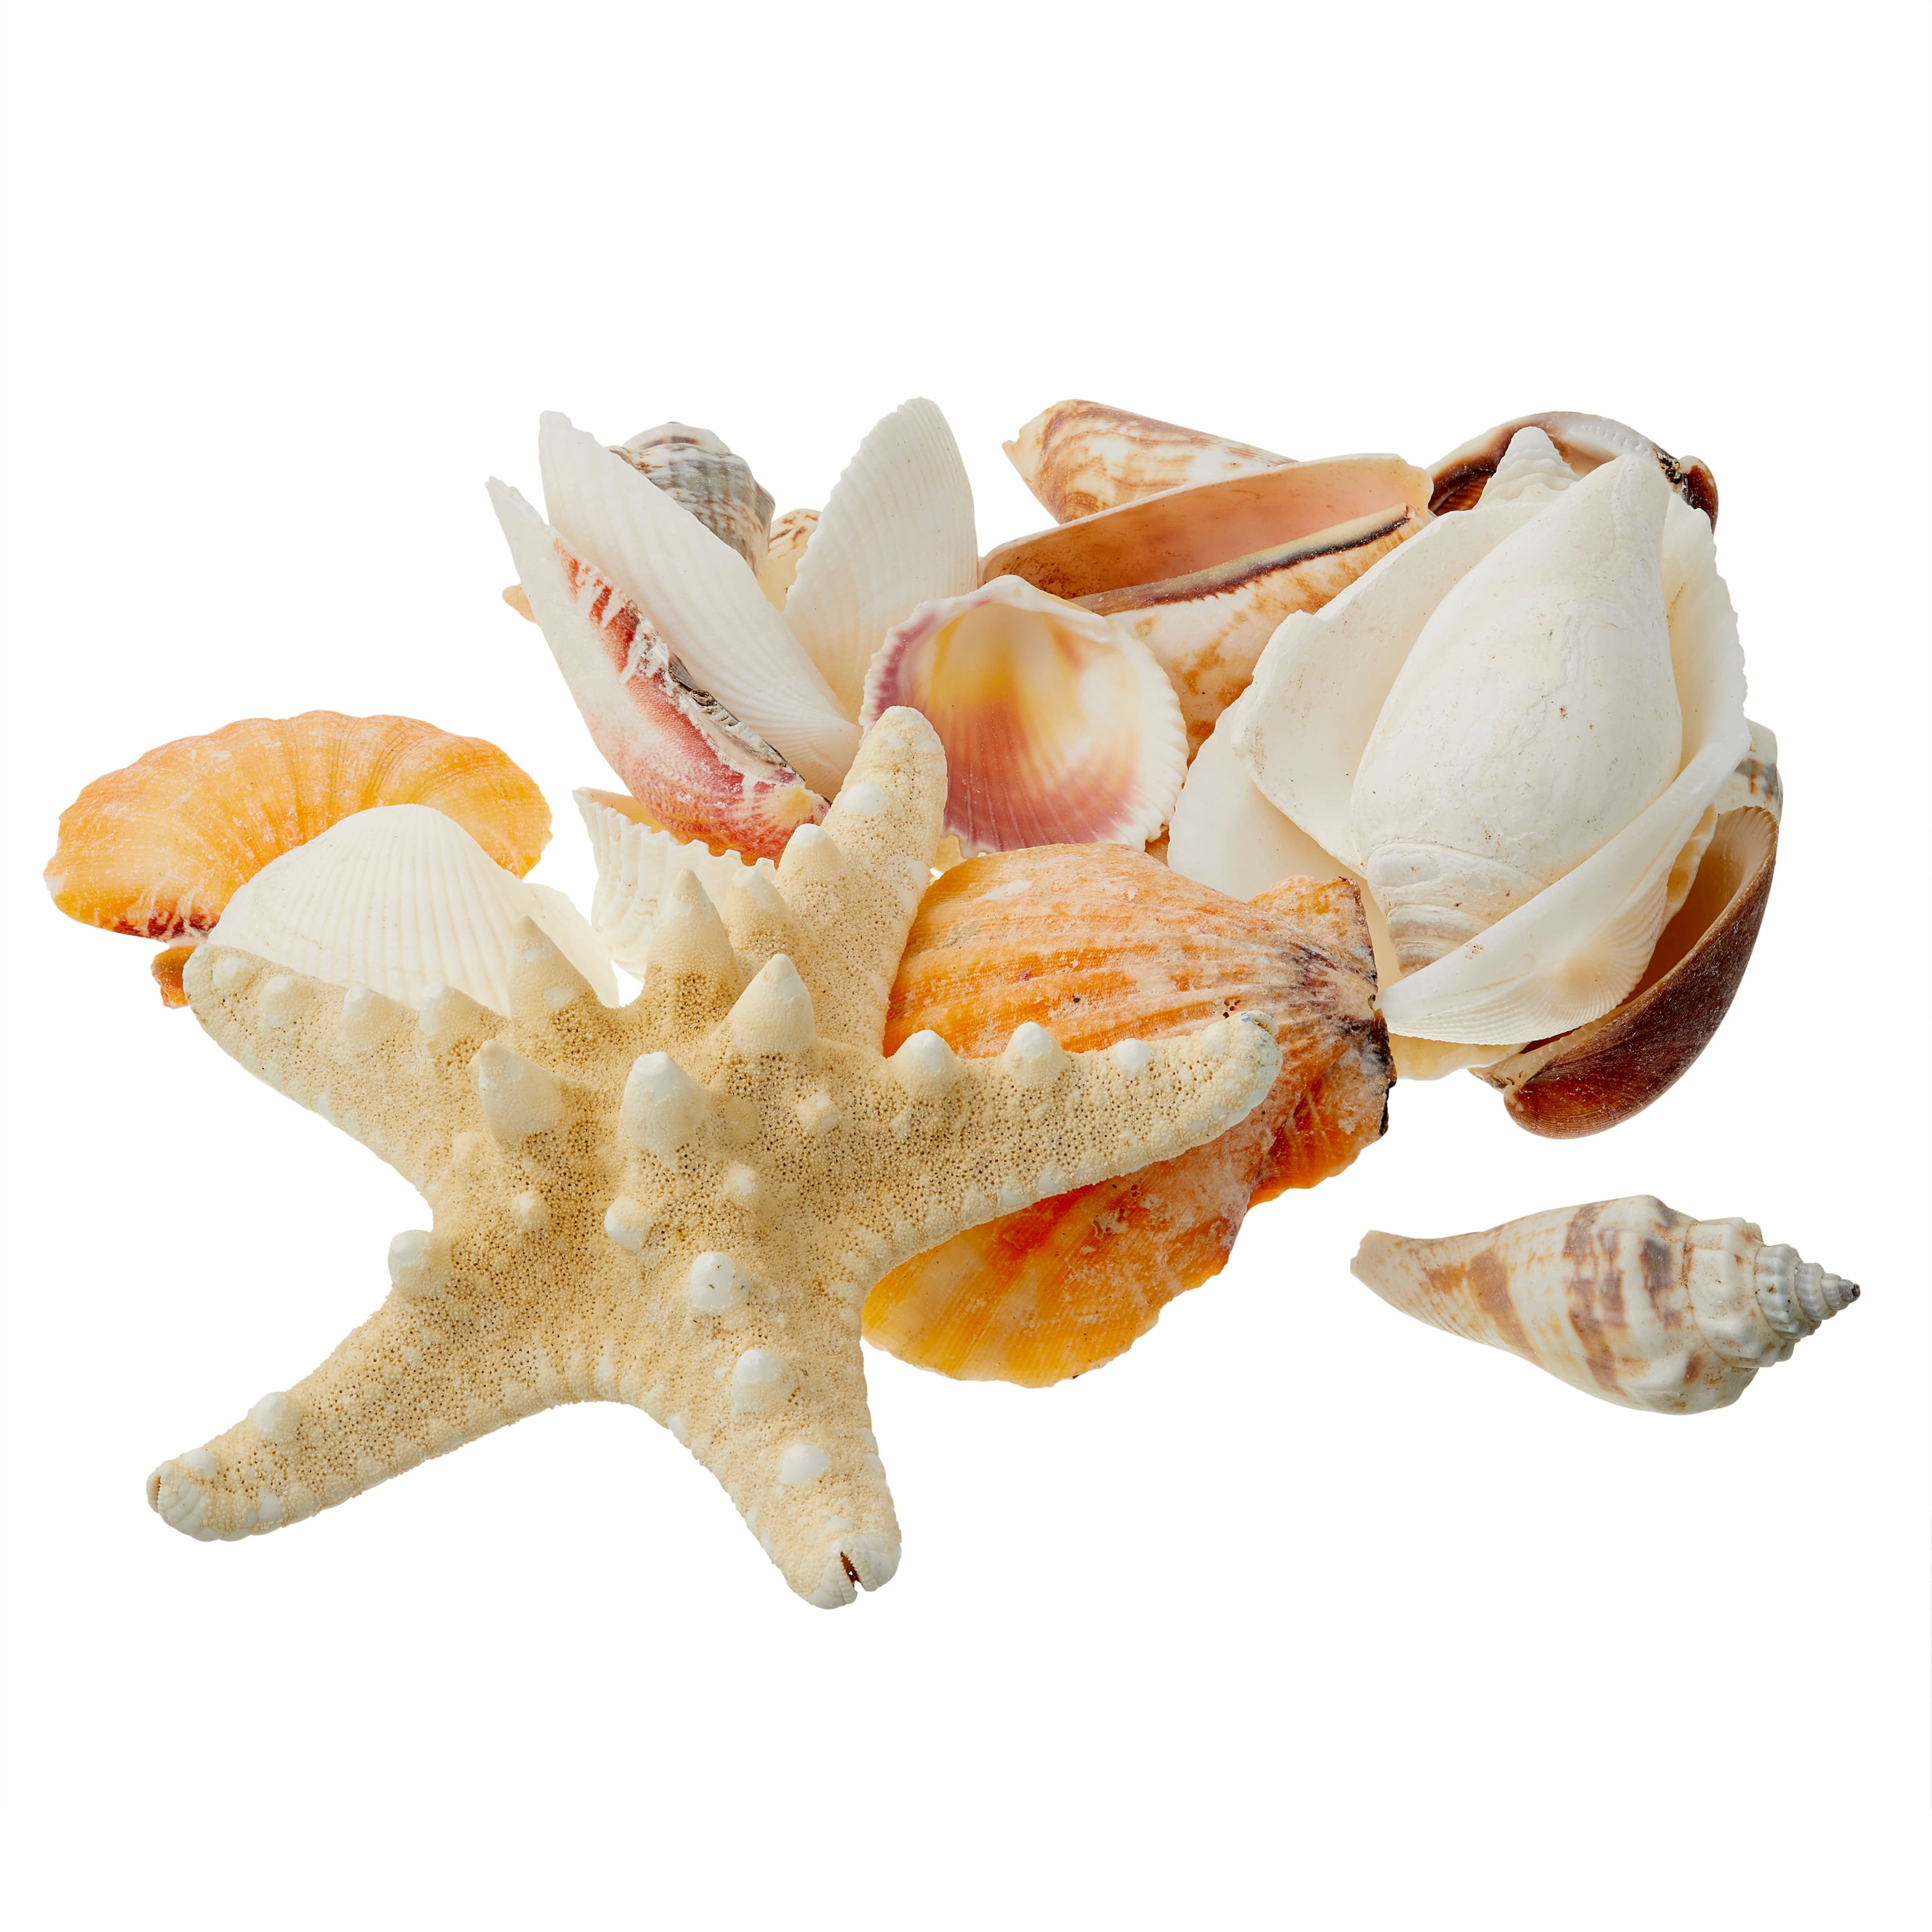 Ocean Beach Spiral Seashells, Natural Craft Seashell Charms Small Conch  Shells for Home Party Wedding Decor Candle Making Fish Tank Vase Filler